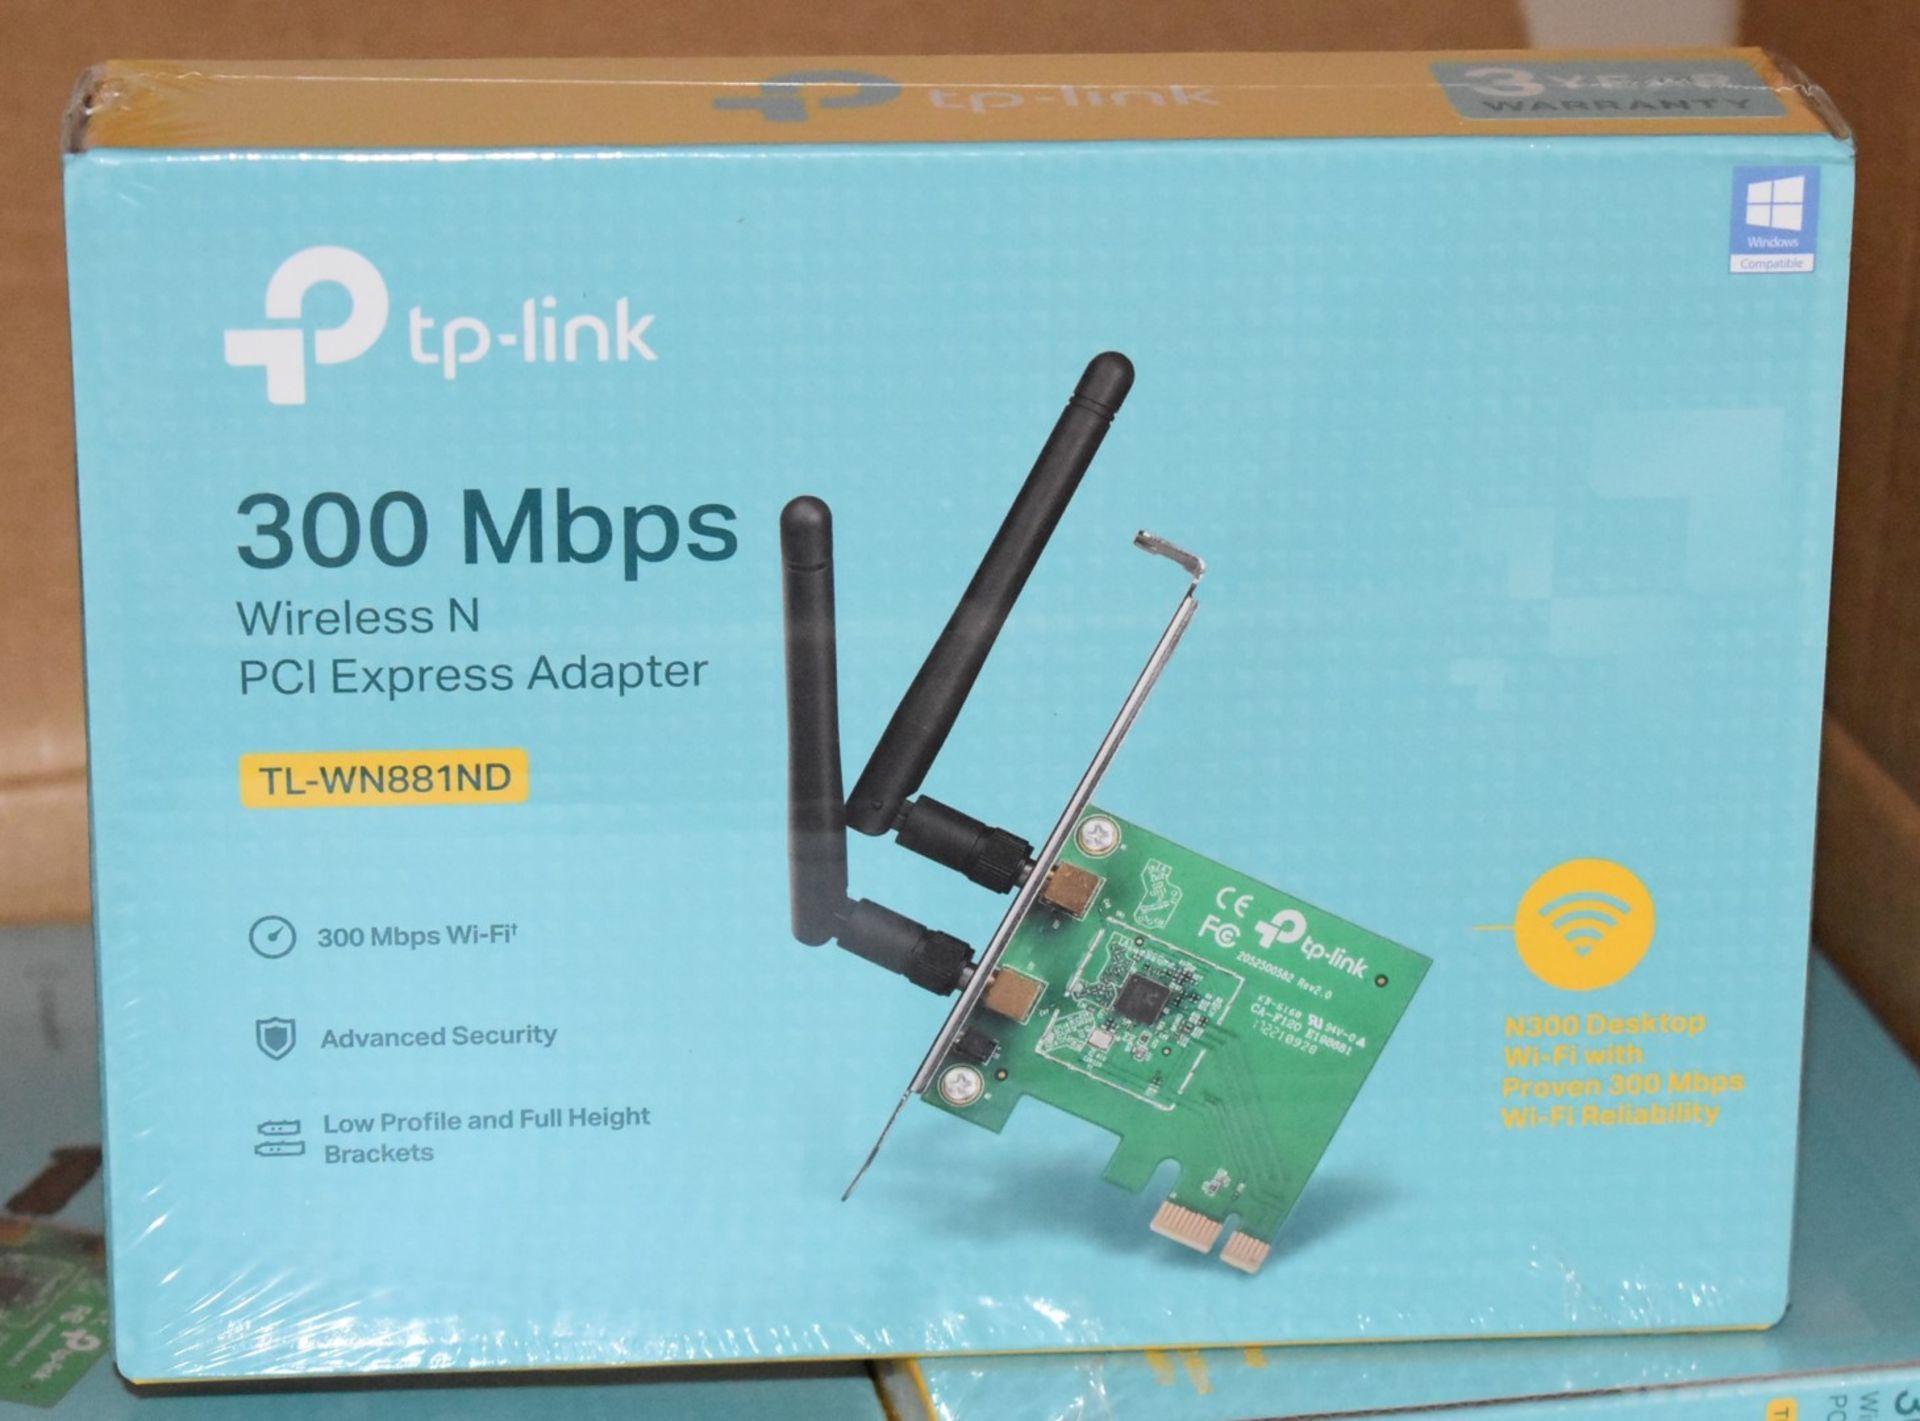 4 x TP Link 300Mbps Wireless N PCI Express Adapters - TL-WN881ND - New Sealed Stock - Image 5 of 6